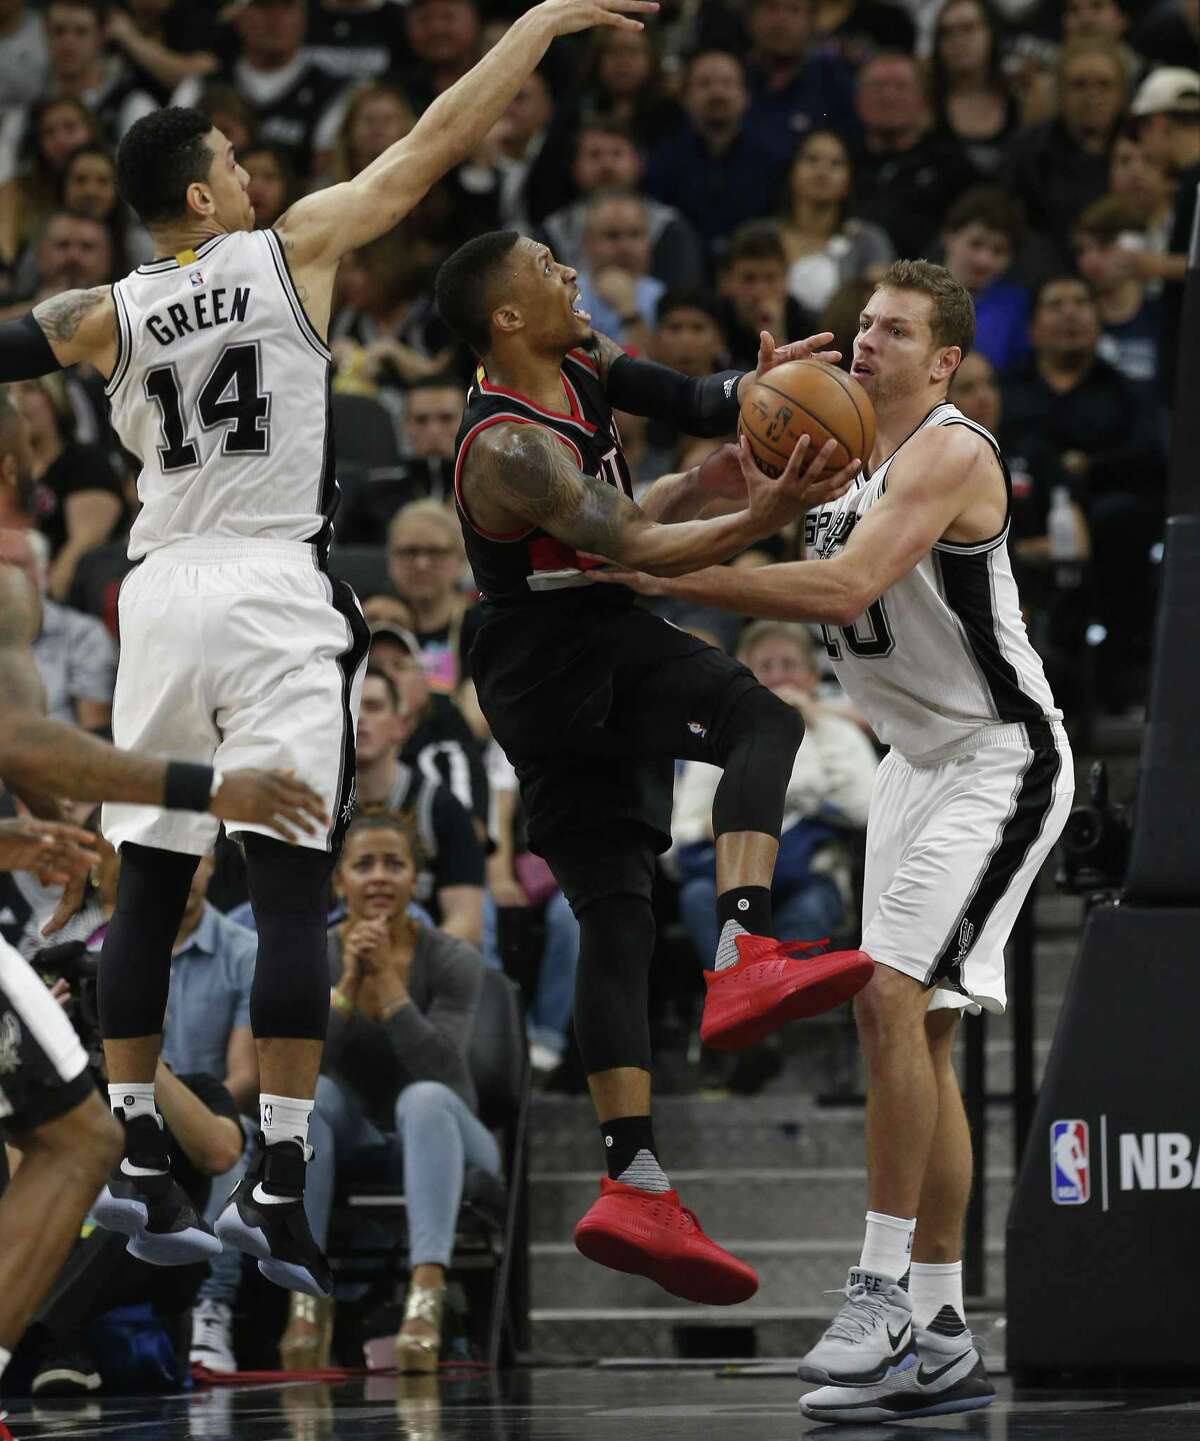 Spurs' Danny Green (14) and David Lee (10) defend against Portland Trailblazers' Damian Lillard (00) during their game at the AT&T Center on Wednesday, Mar. 15, 2017. Trailblazers defeated the Spurs, 110-106. (Kin Man Hui/San Antonio Express-News)